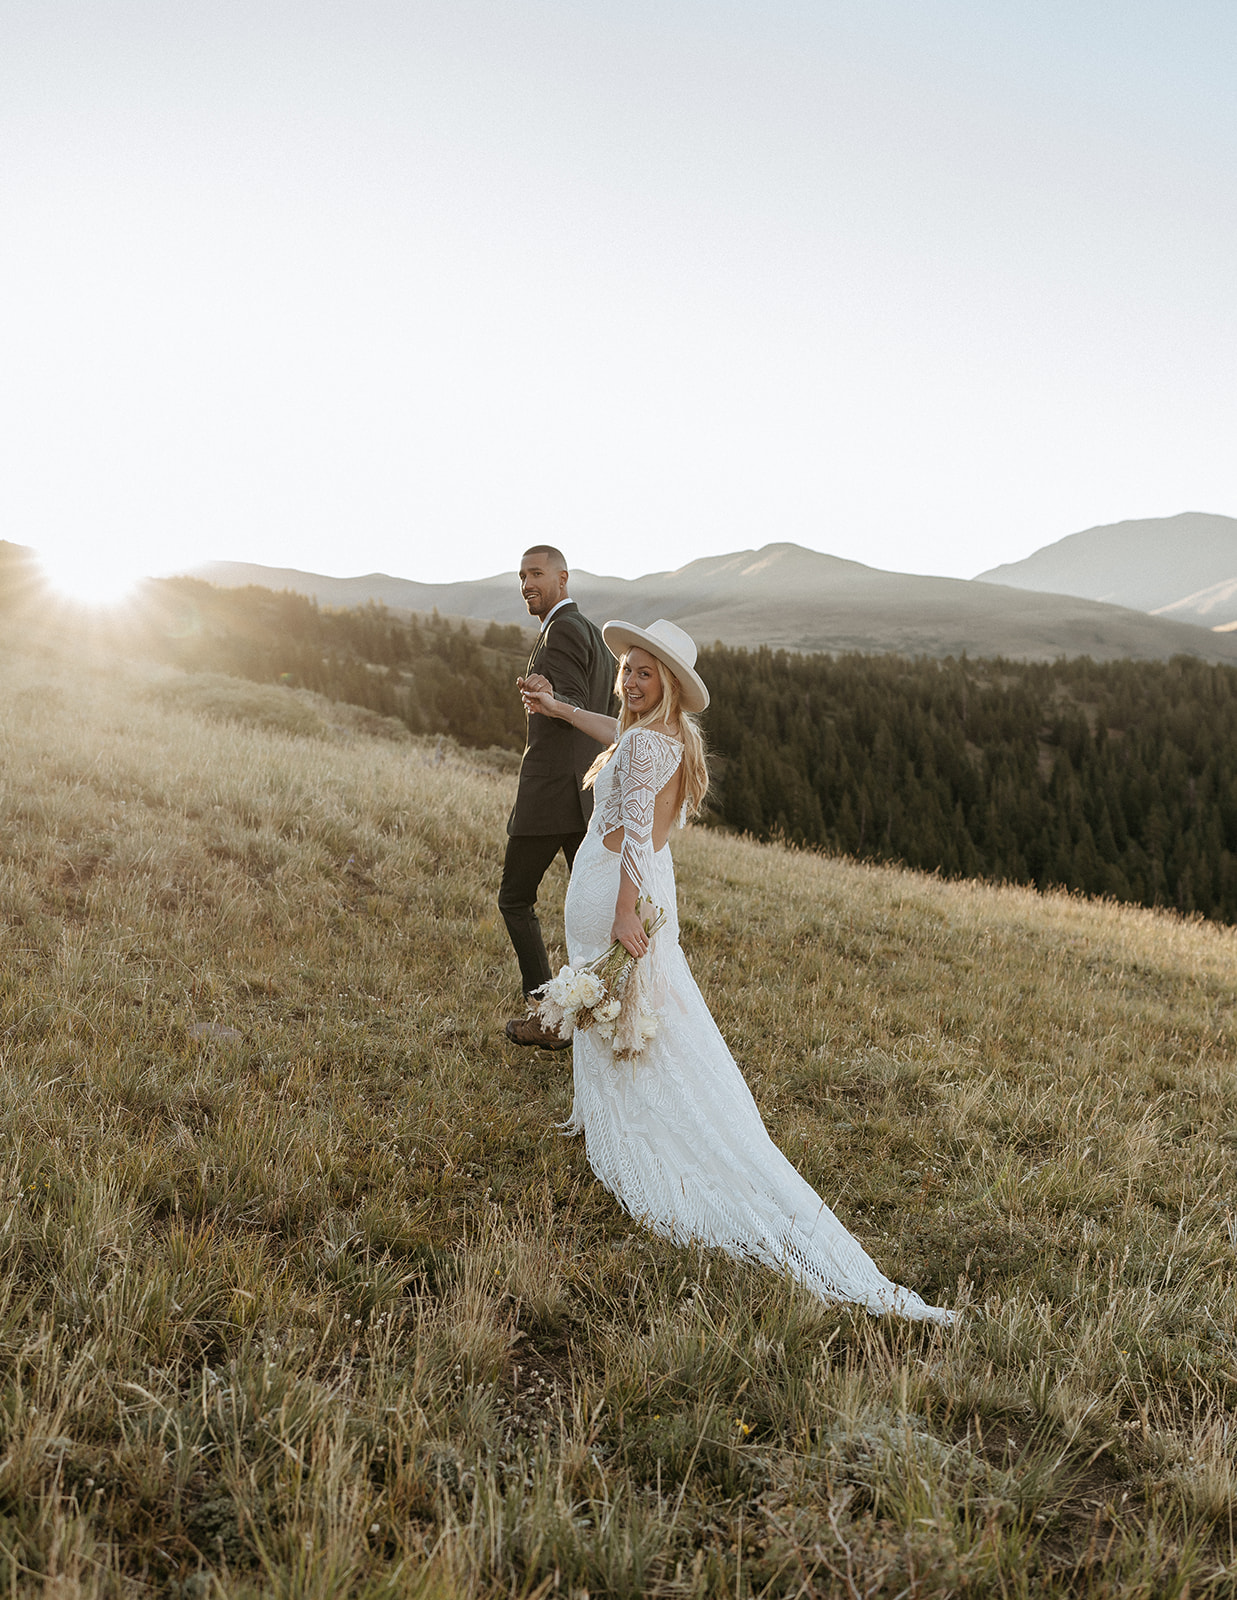 A groom leads his bride up a hillside by the hand into the sunset at their Hoosier Pass Elopement